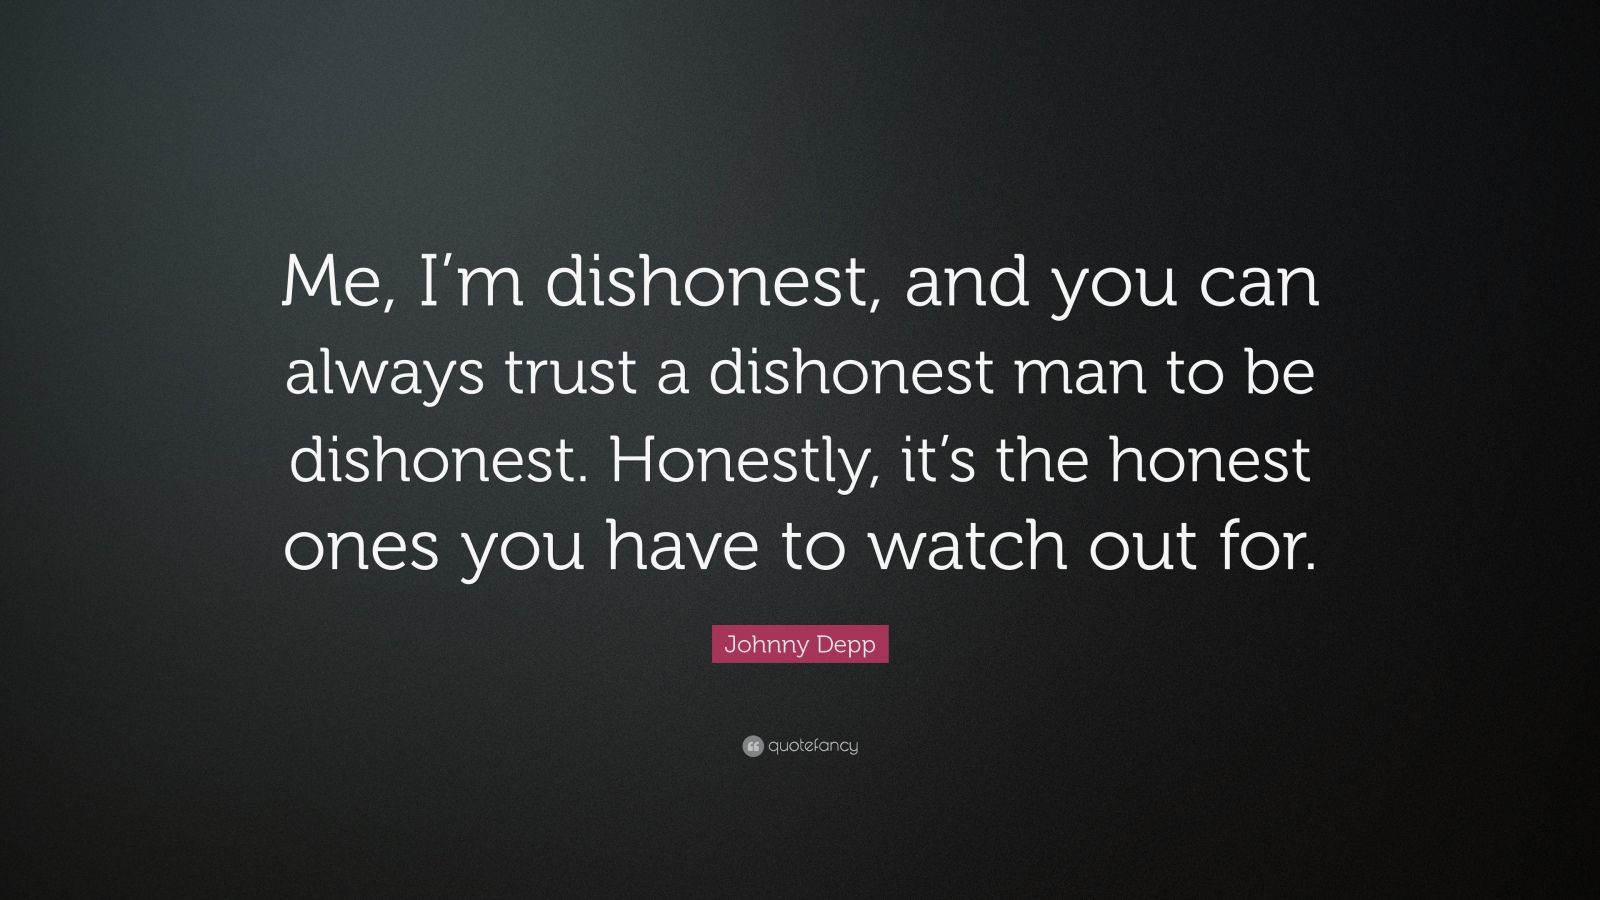 Johnny Depp Quote: “Me, I’m dishonest, and you can always trust a ...